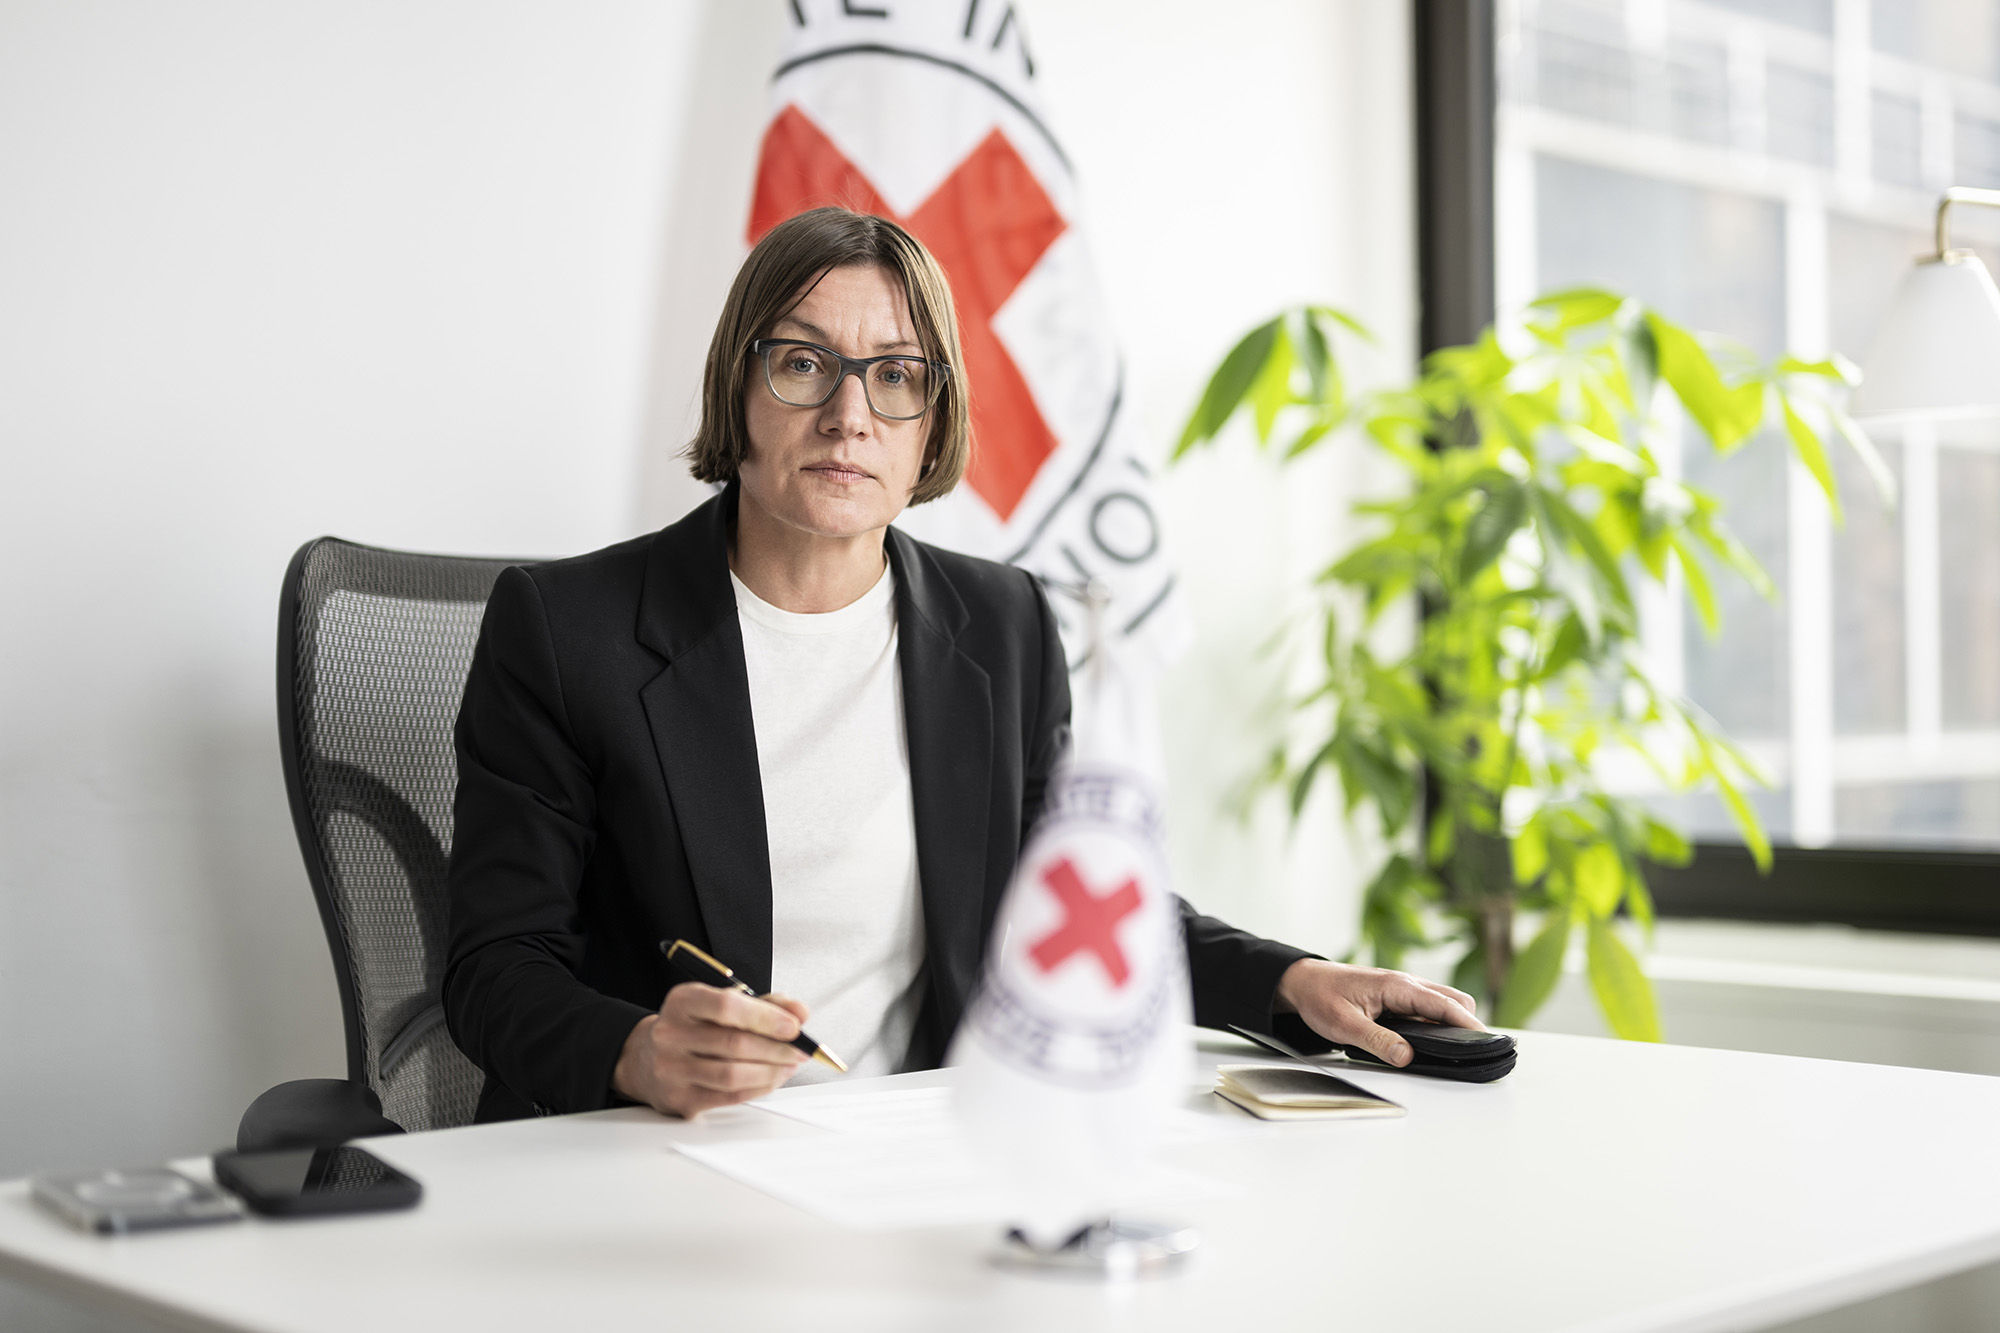 The President of the International Committee of the Red Cross ICRC, Mirjana Spoljaric, sits for a portrait in the organisation's office in New York, US, on May 22.